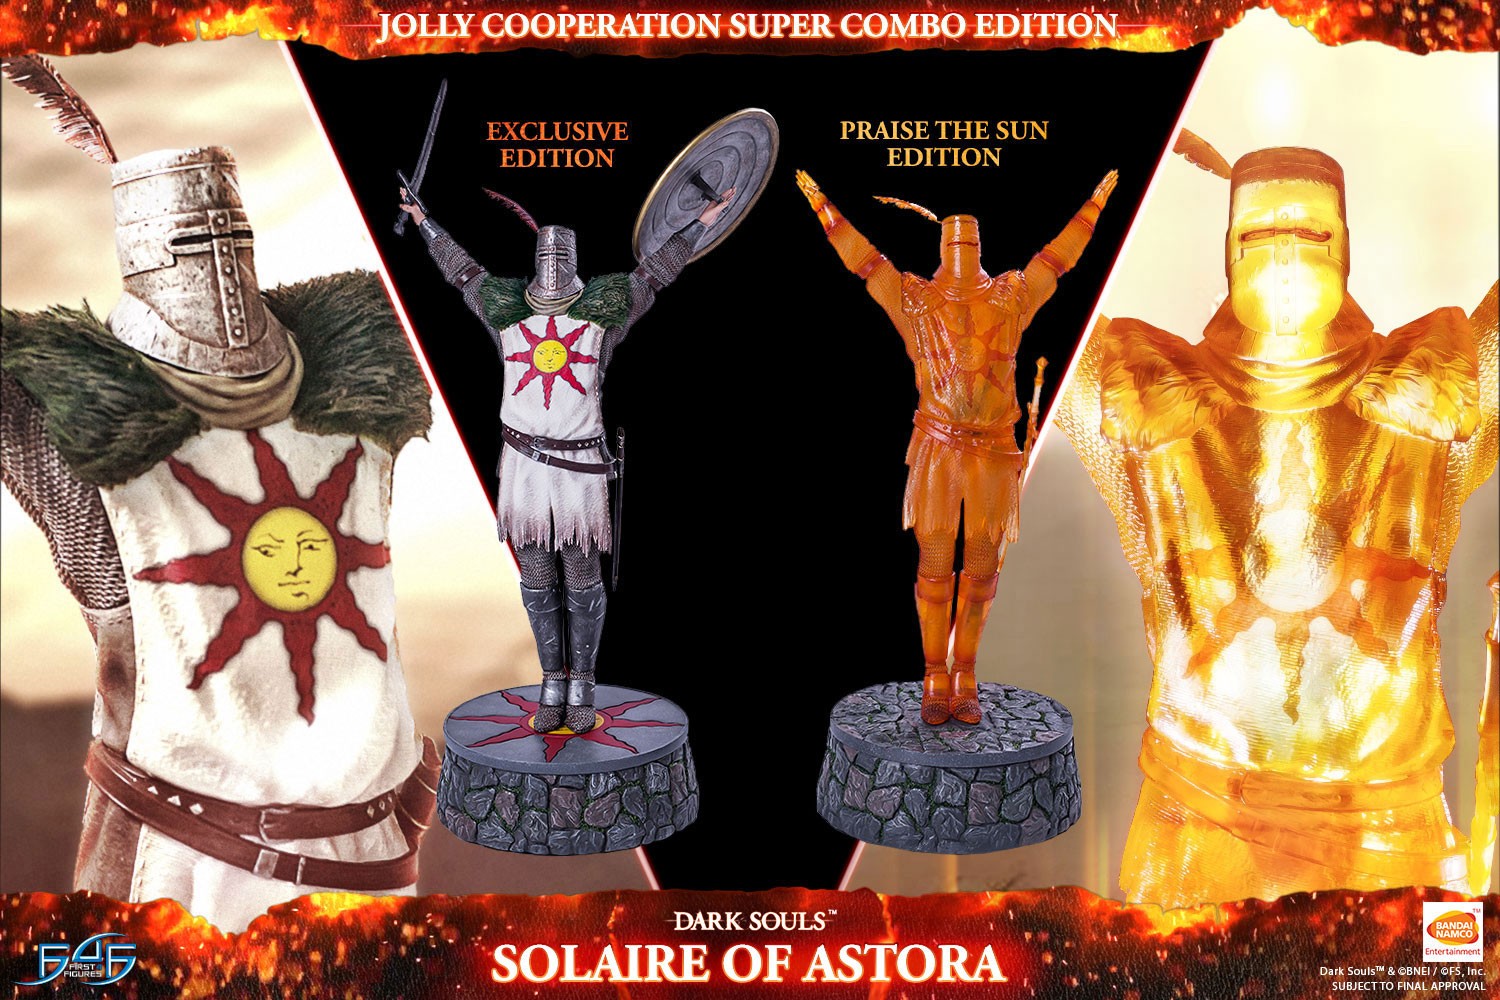 Solaire of Astora Jolly Cooperation Super Combo Edition